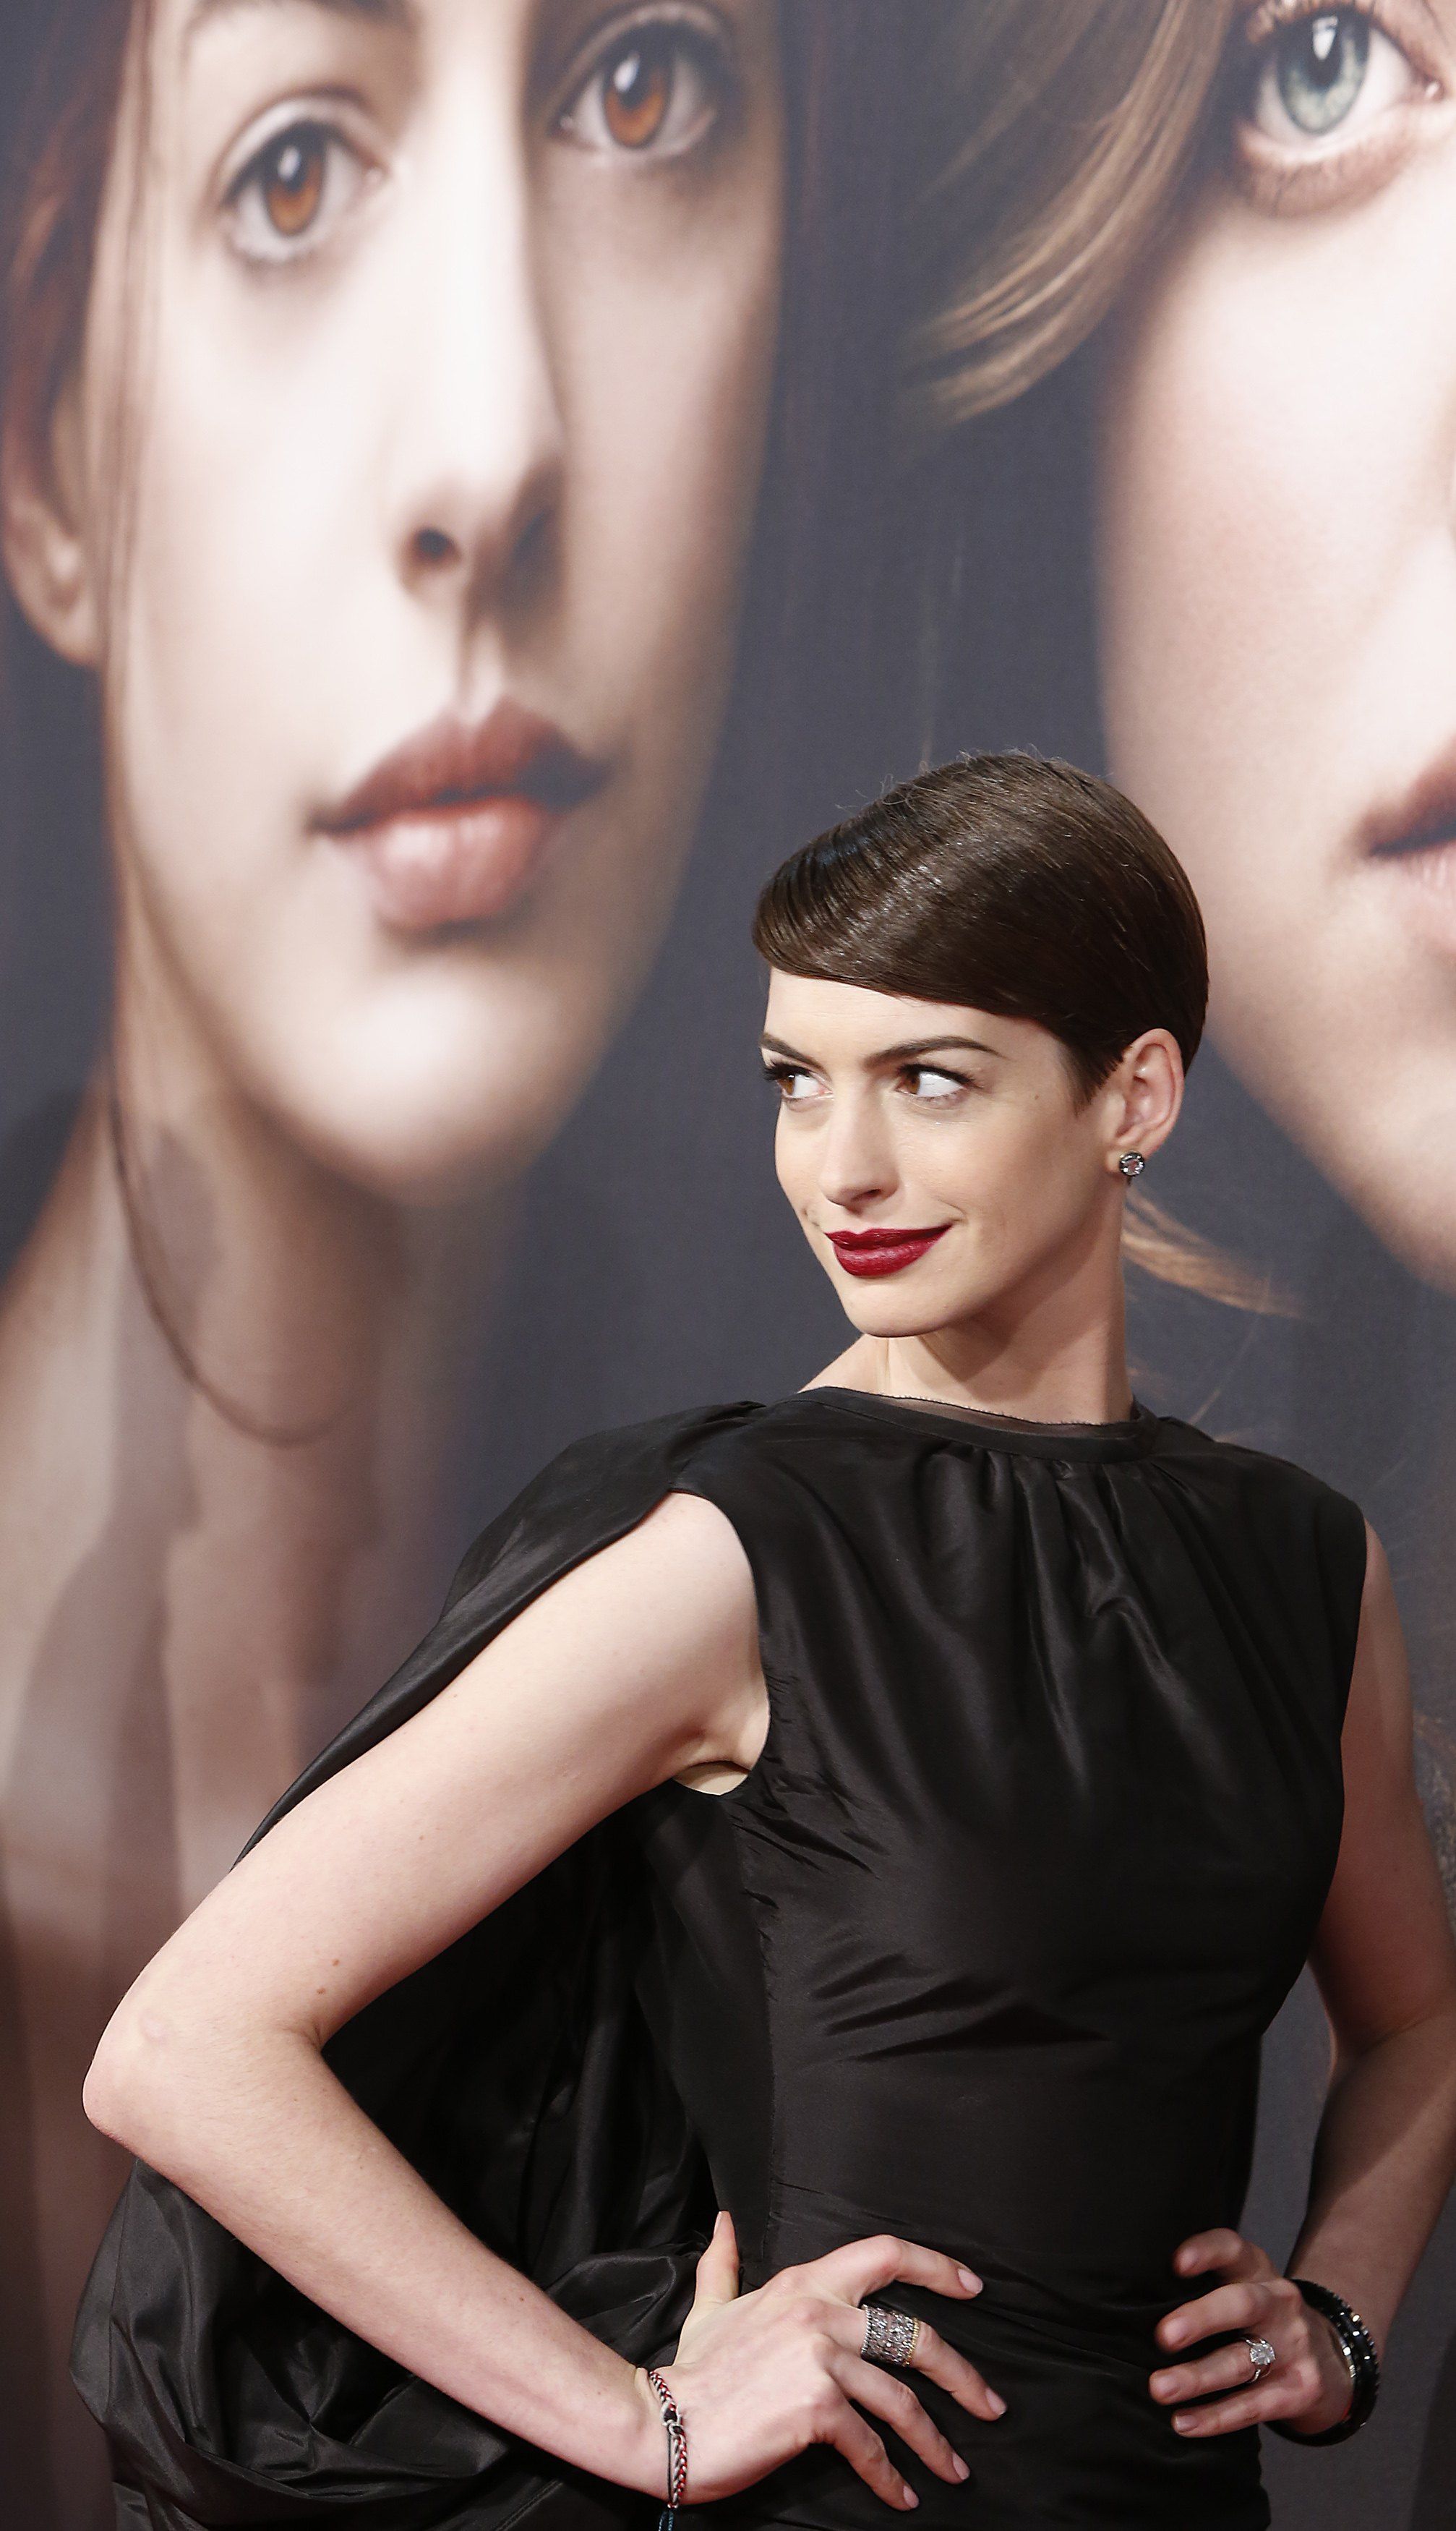 Anne Hathaway arrives at NYC Premiere of Les Miserables